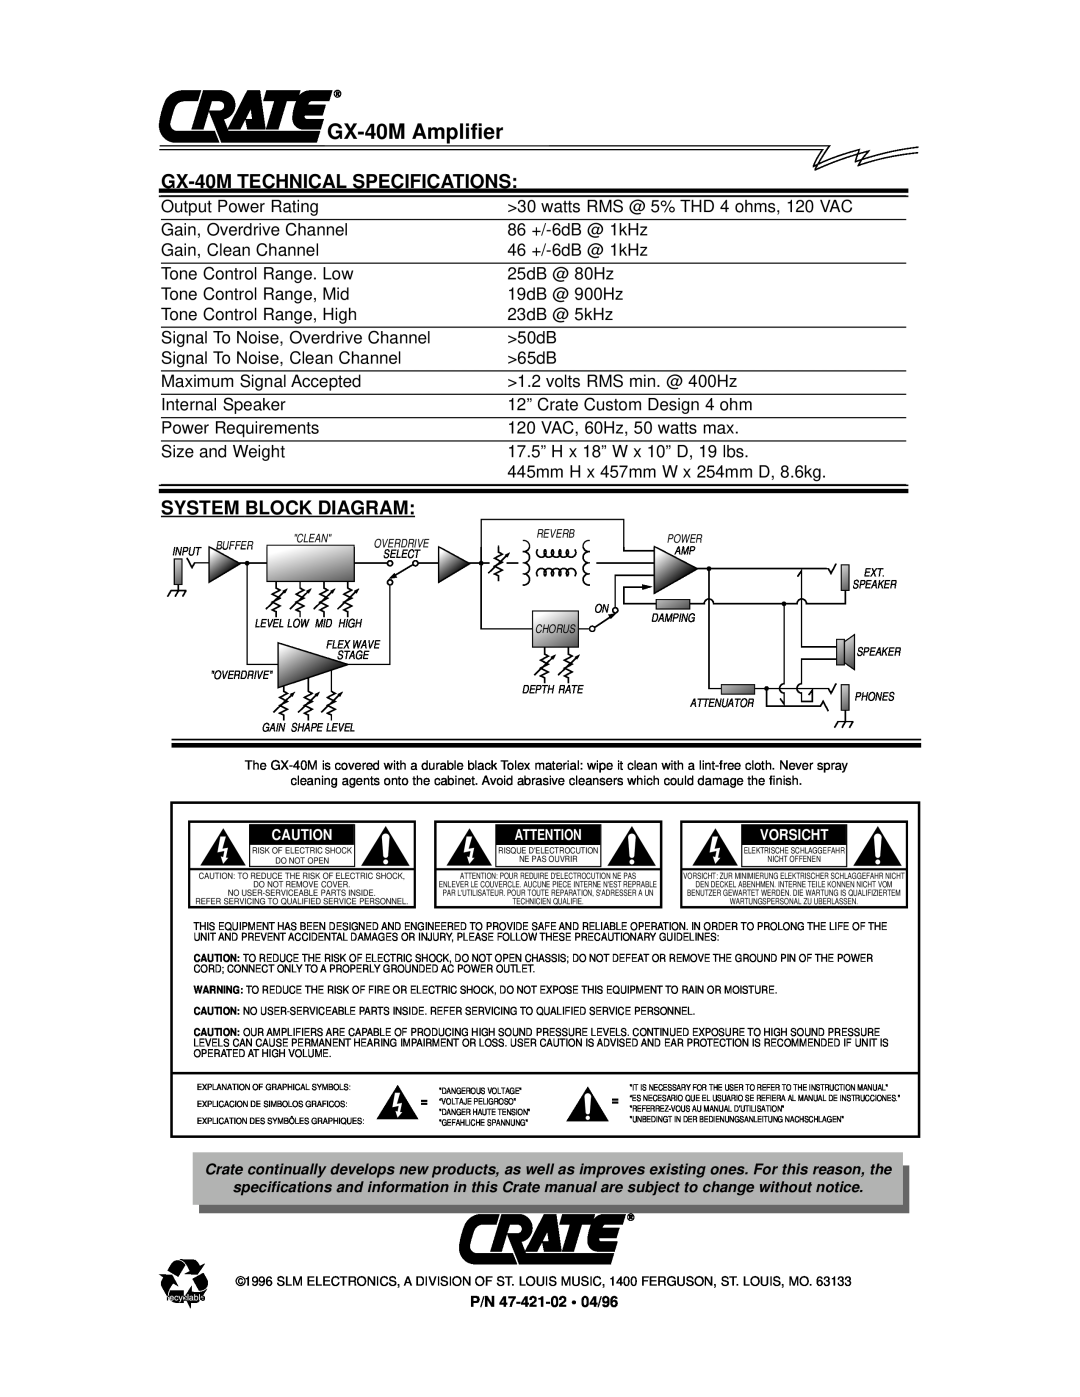 Crate Amplifiers owner manual GX-40M TECHNICAL SPECIFICATIONS, System Block Diagram 